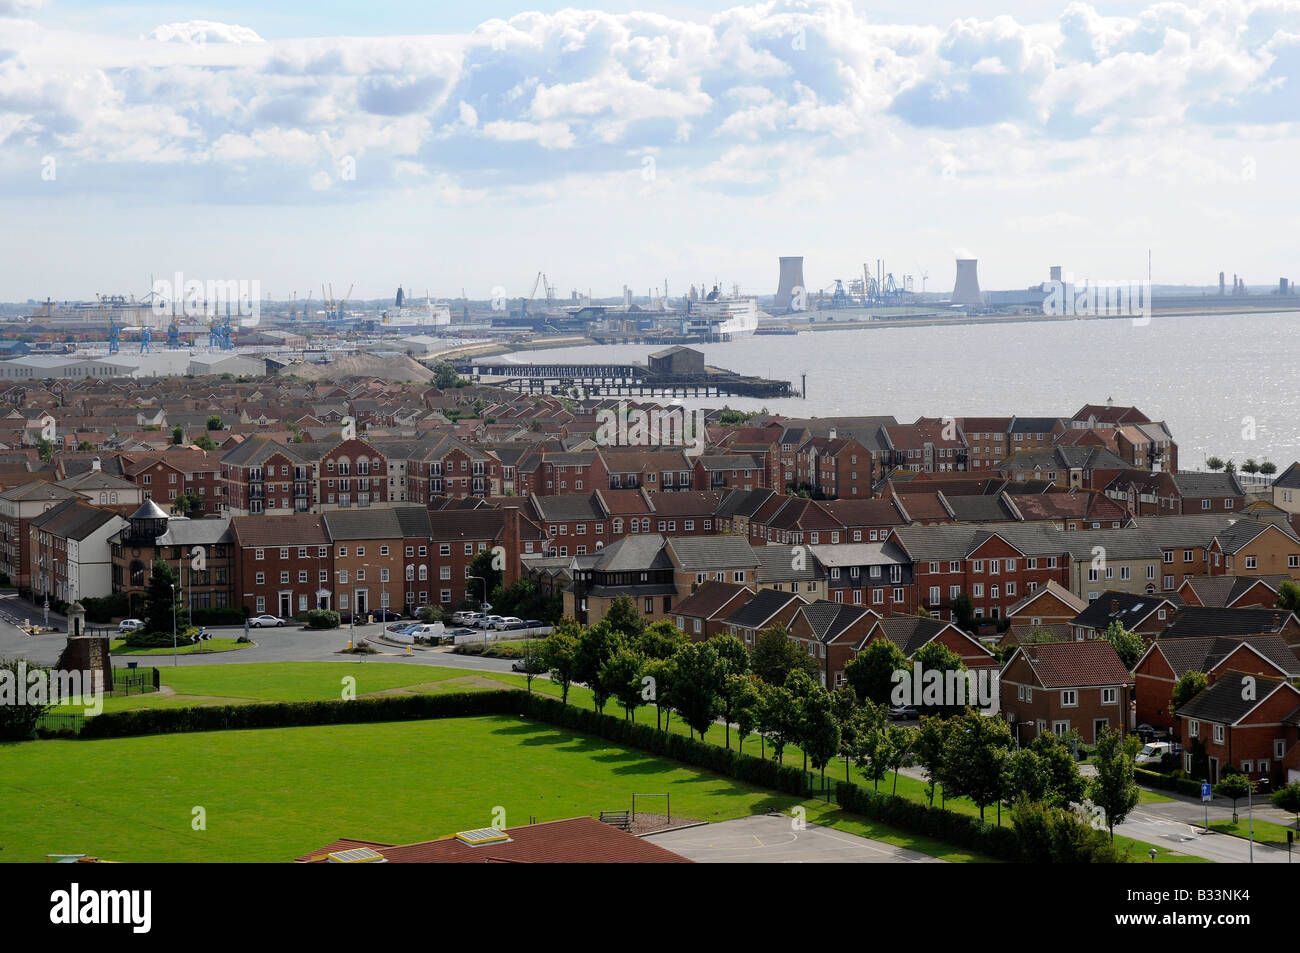 New Housing Development on the banks of the Humber Estuary, Hull, Humberside, Northern England Stock Photo